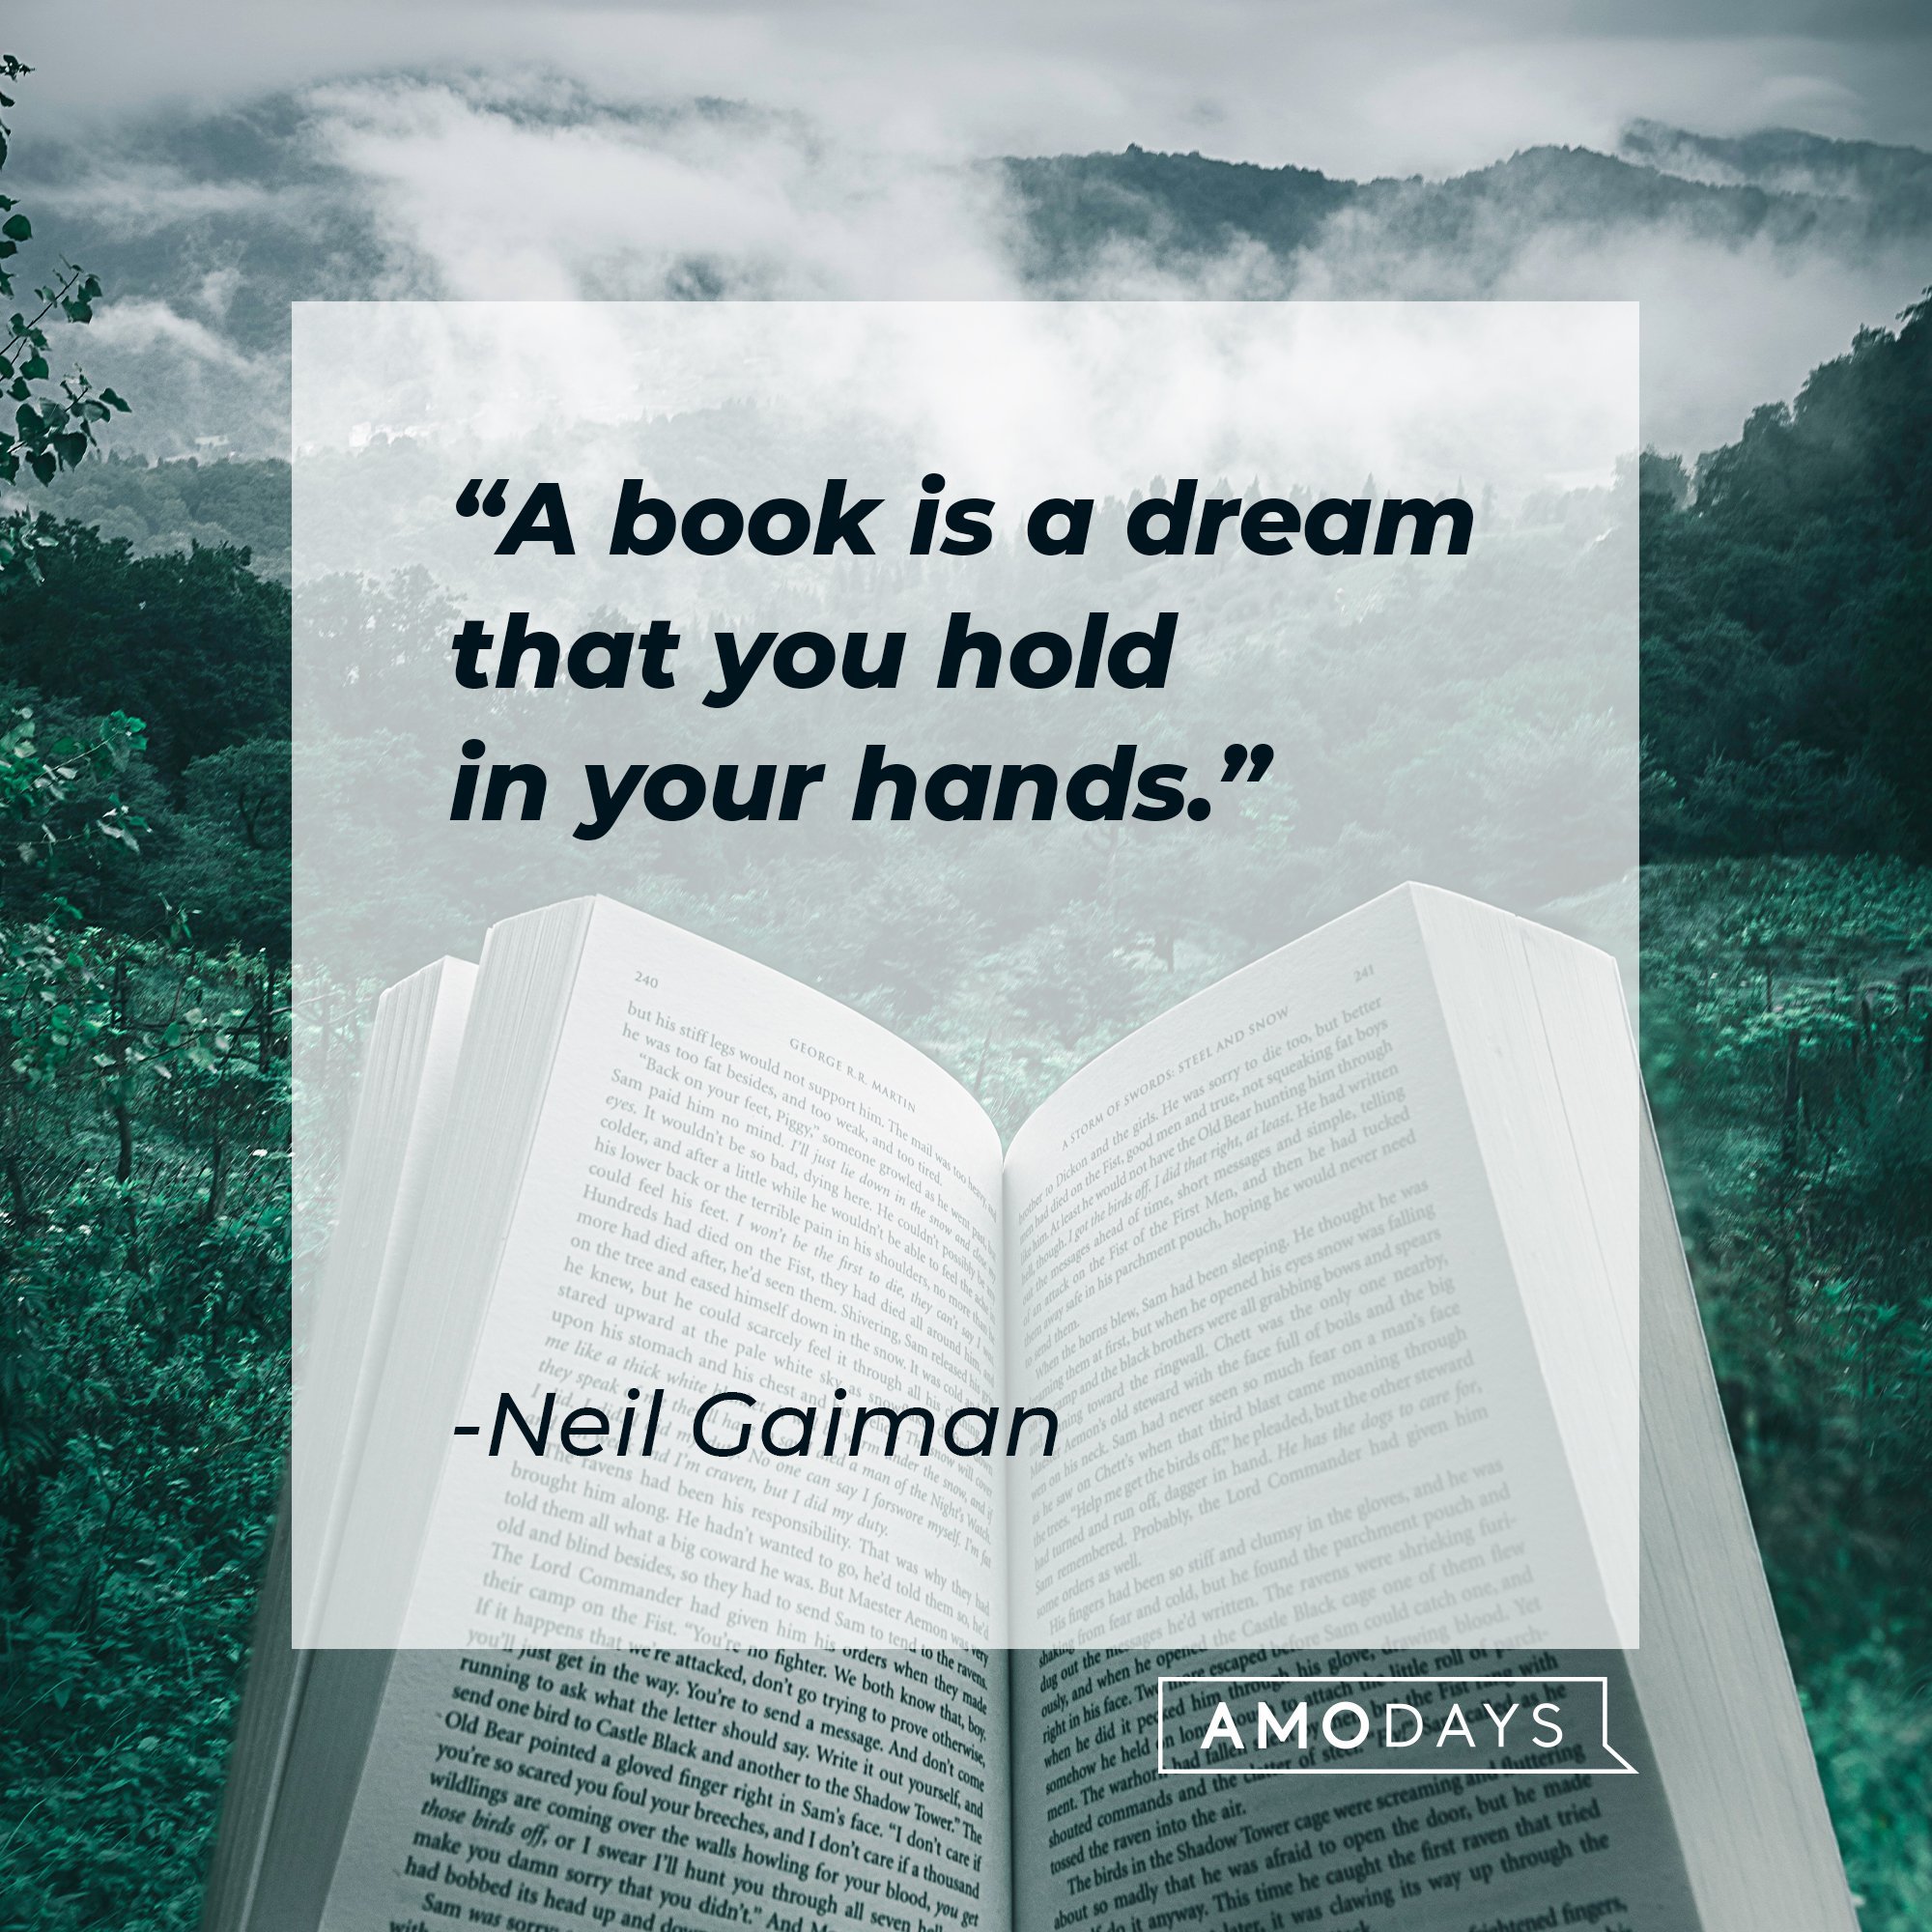  Neil Gaiman’s quote: "A book is a dream that you hold in your hands." | Image: AmoDays